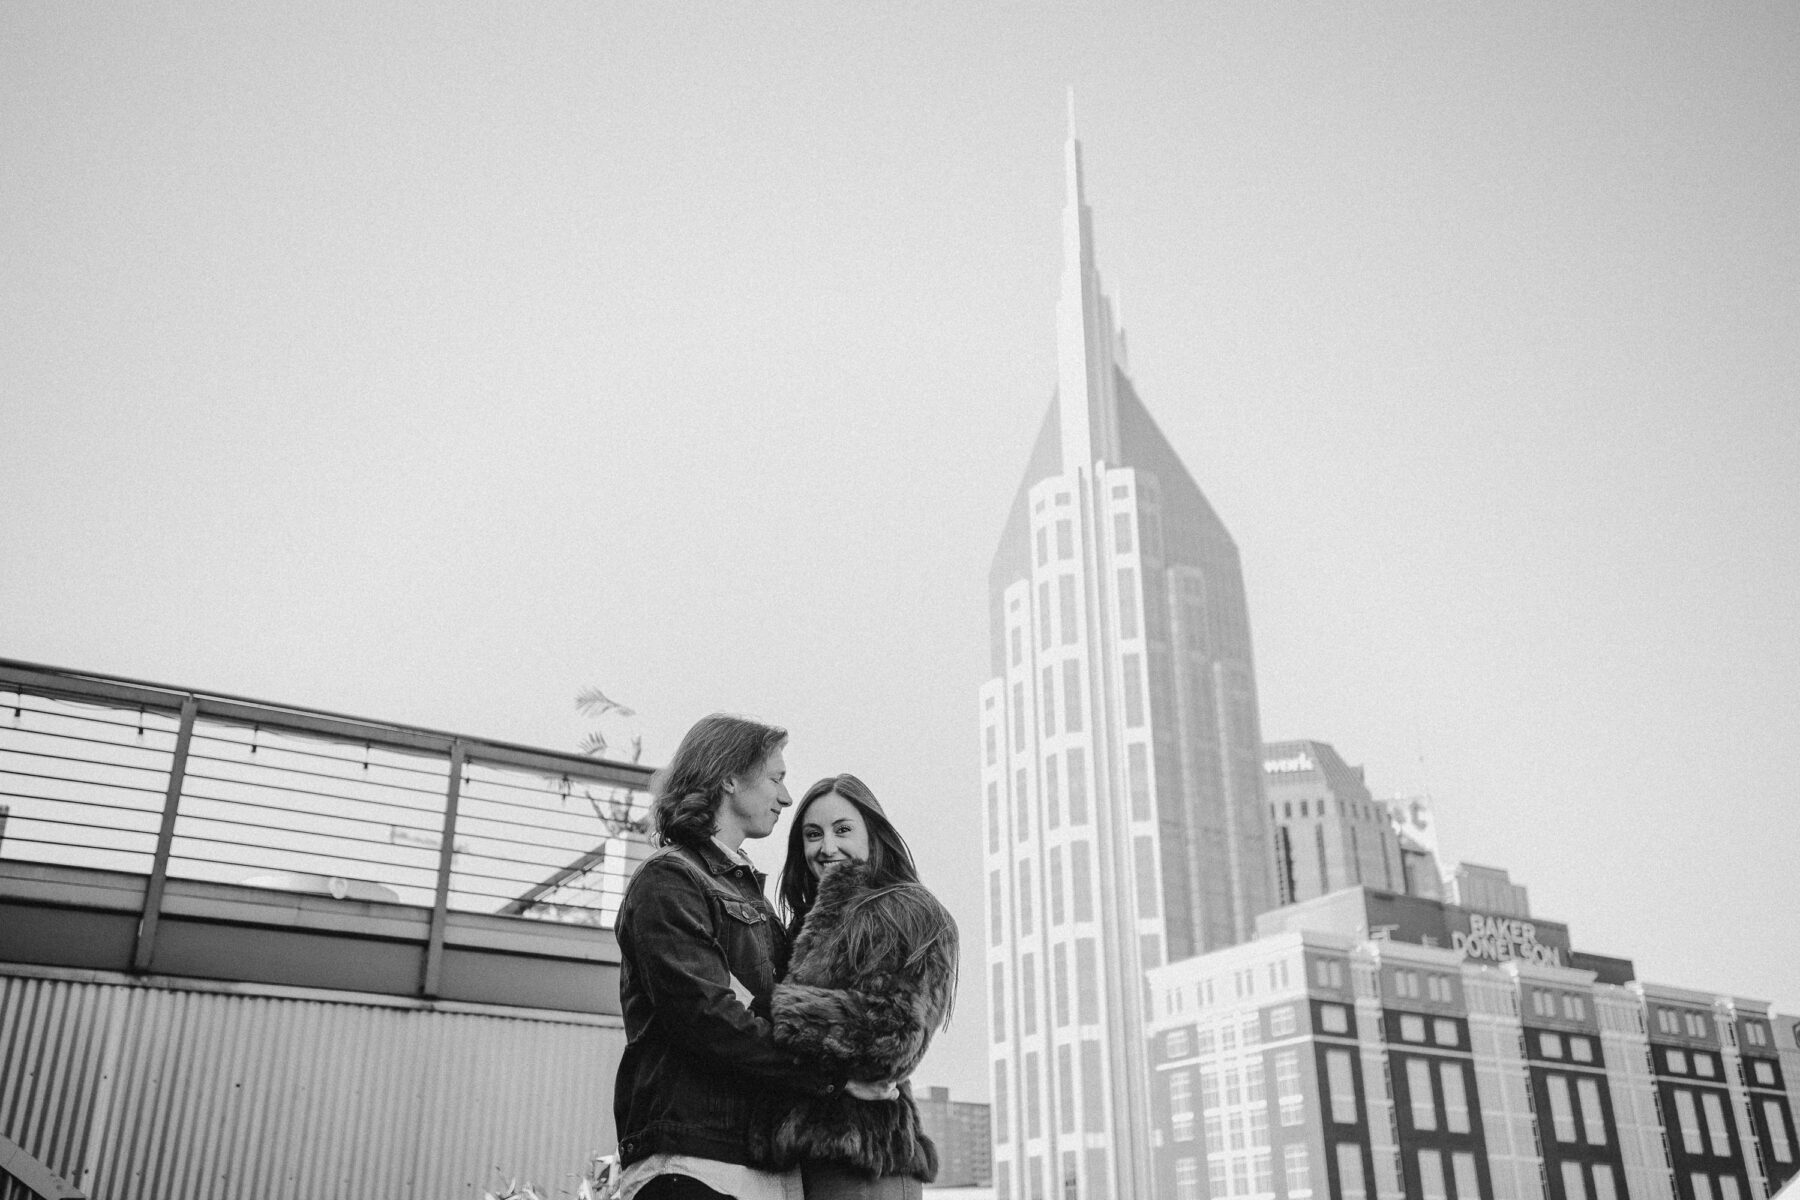 Super Cute Downtown Nashville Photo Session from CMS Photography featured on Nashville Bride Guide